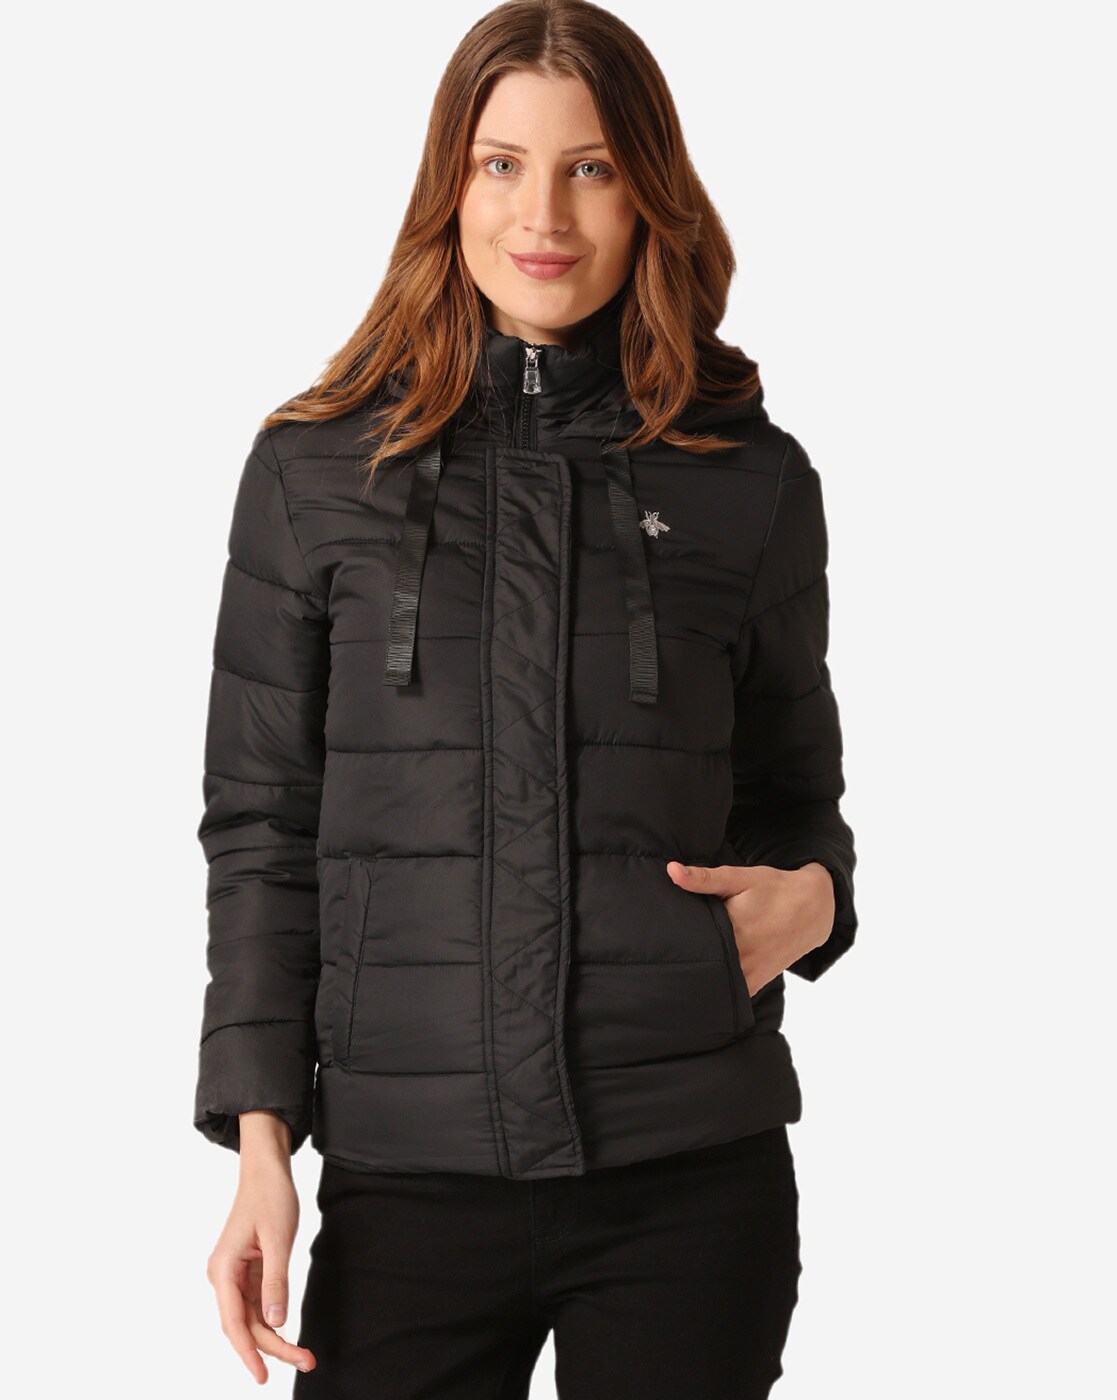 Buy Mode by Red Tape Women's Jackets (MFJ0007_Silver_XS) at Amazon.in